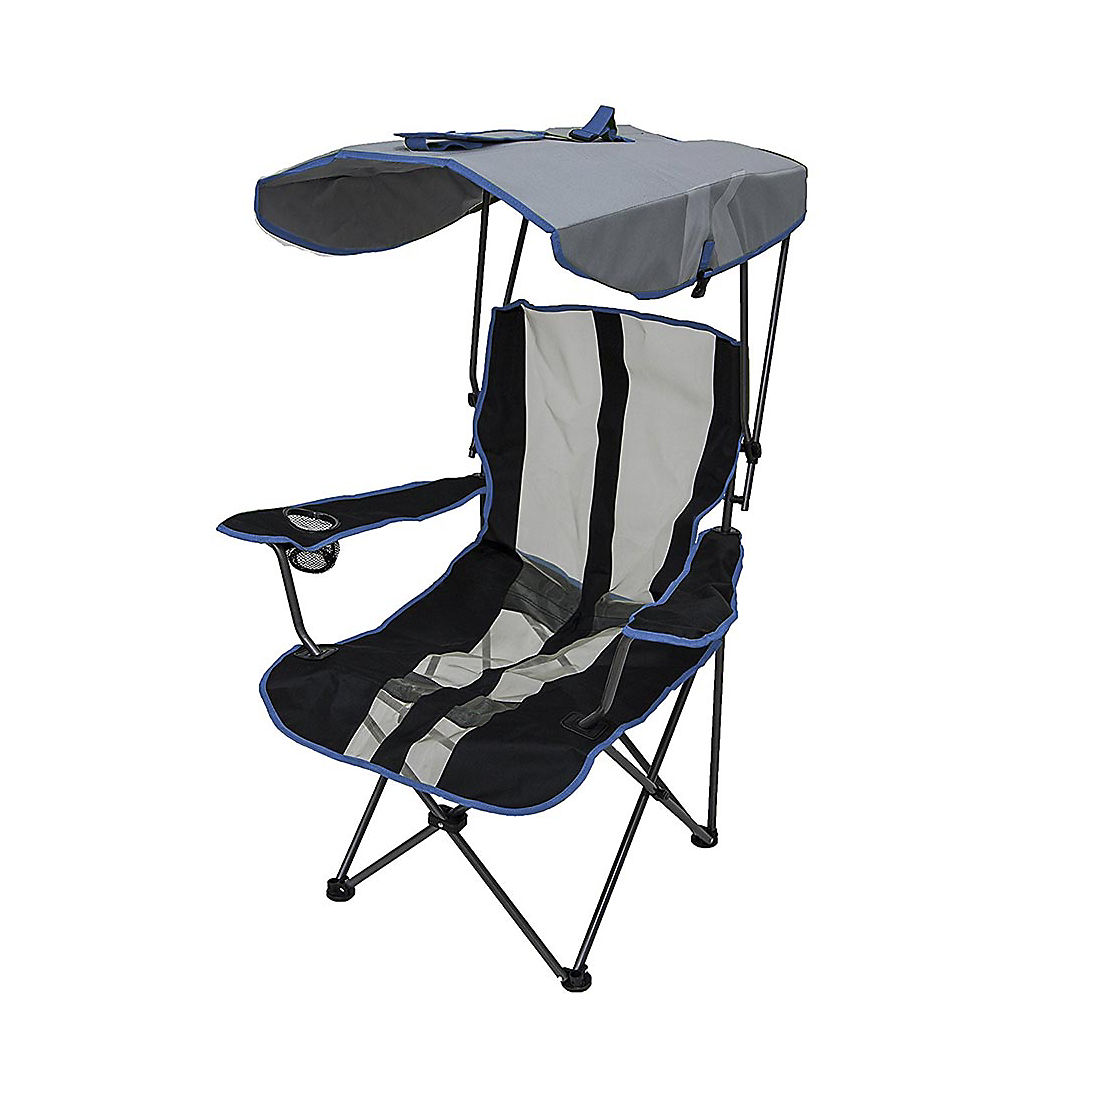 Simple Beach Chair With Canopy Bjs for Small Space